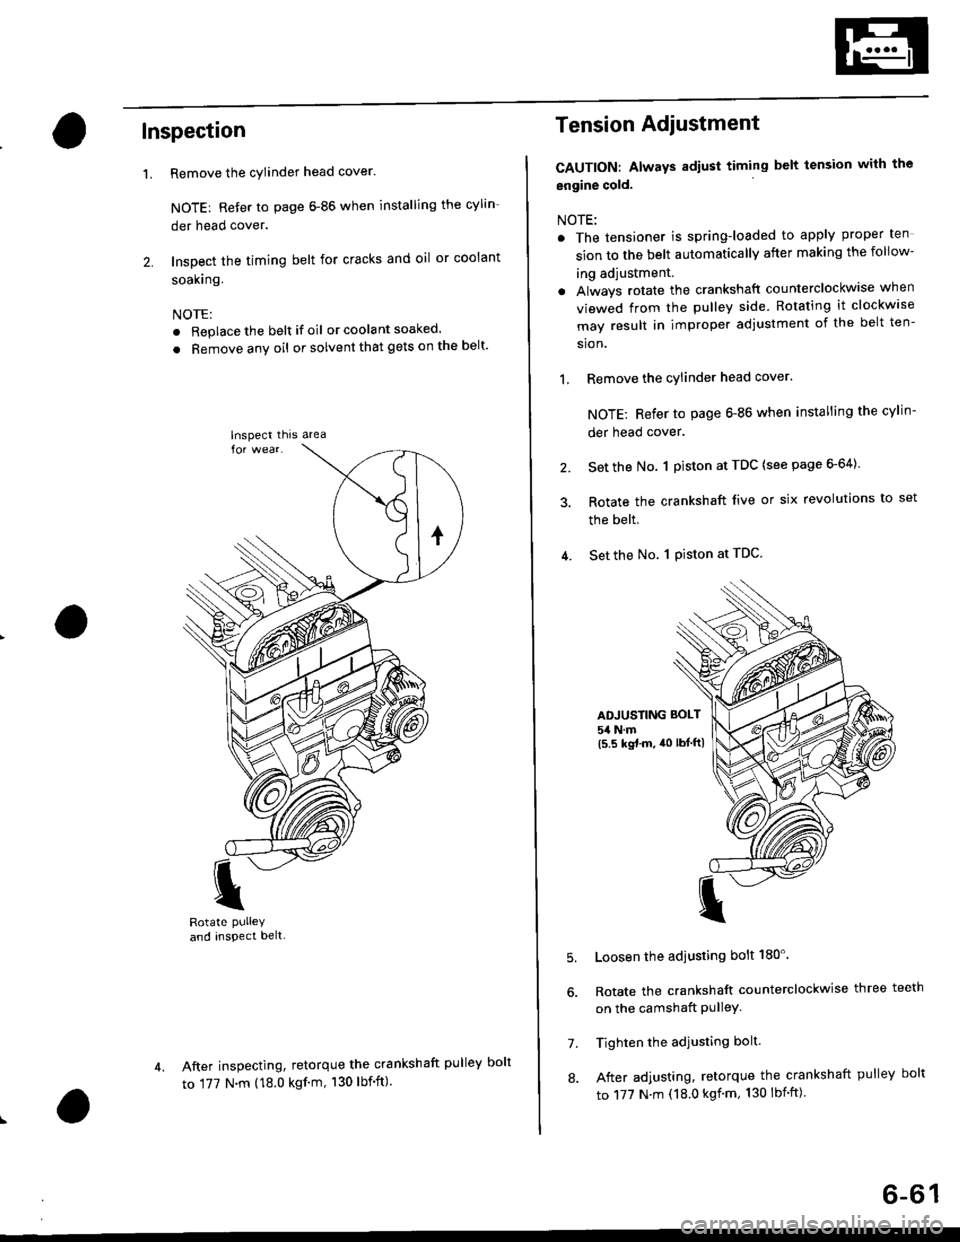 HONDA CIVIC 1998 6.G User Guide Inspection
Remove the cylinder head cover.
NOTE: Refer to page 6-86 when installing the cylin-
der head cover.
Inspect the timing belt for cracks and oil or coolant
soakrng.
NOTE:
. Replace the belt i